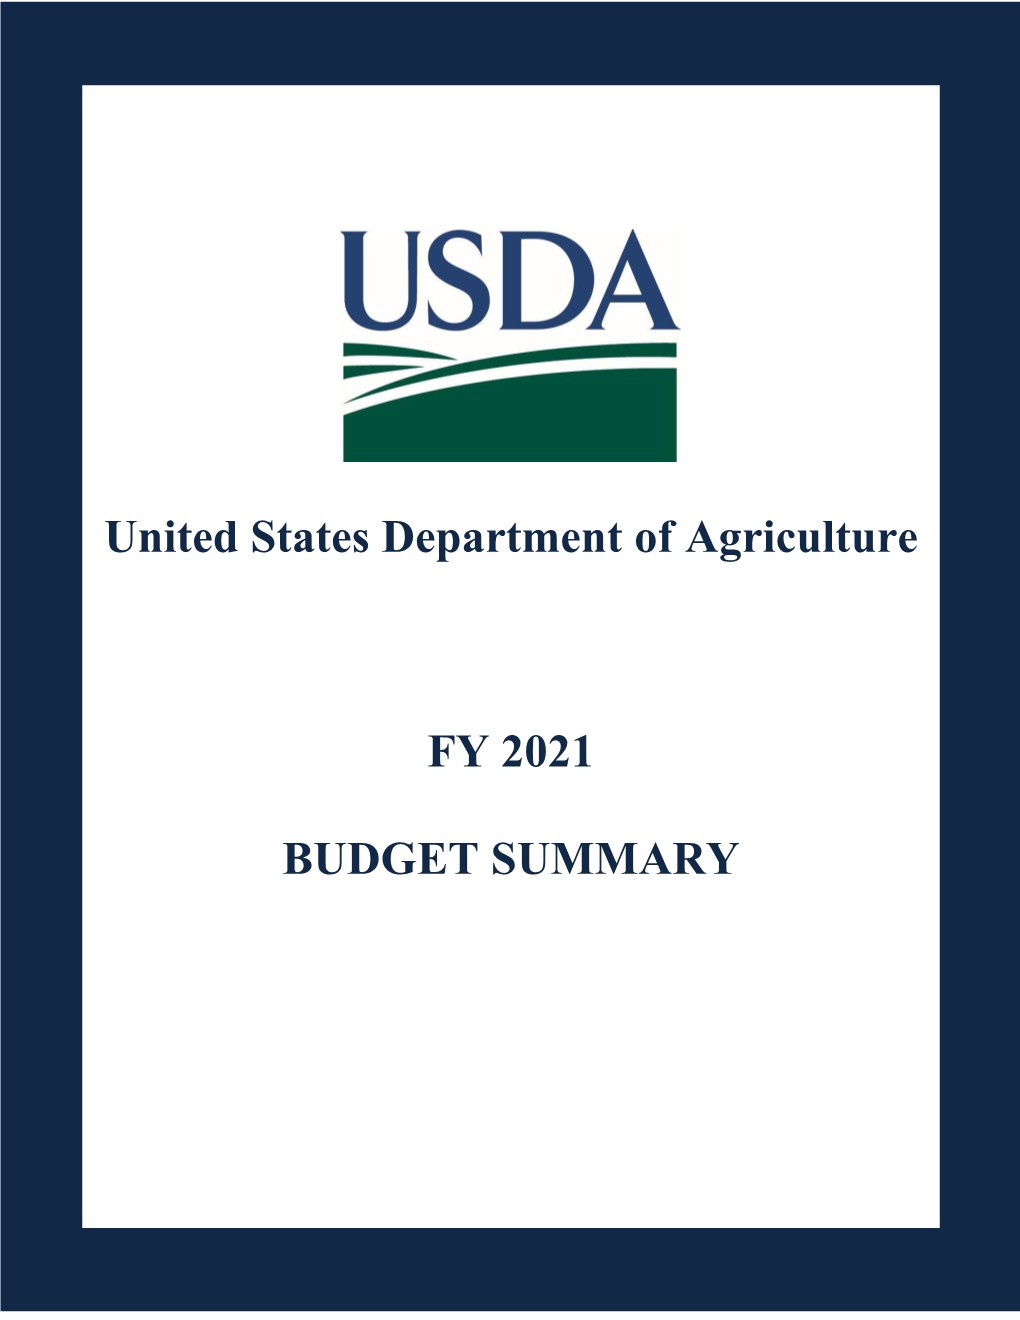 U.S. Department of Agriculture FY 2021 Budget Summary